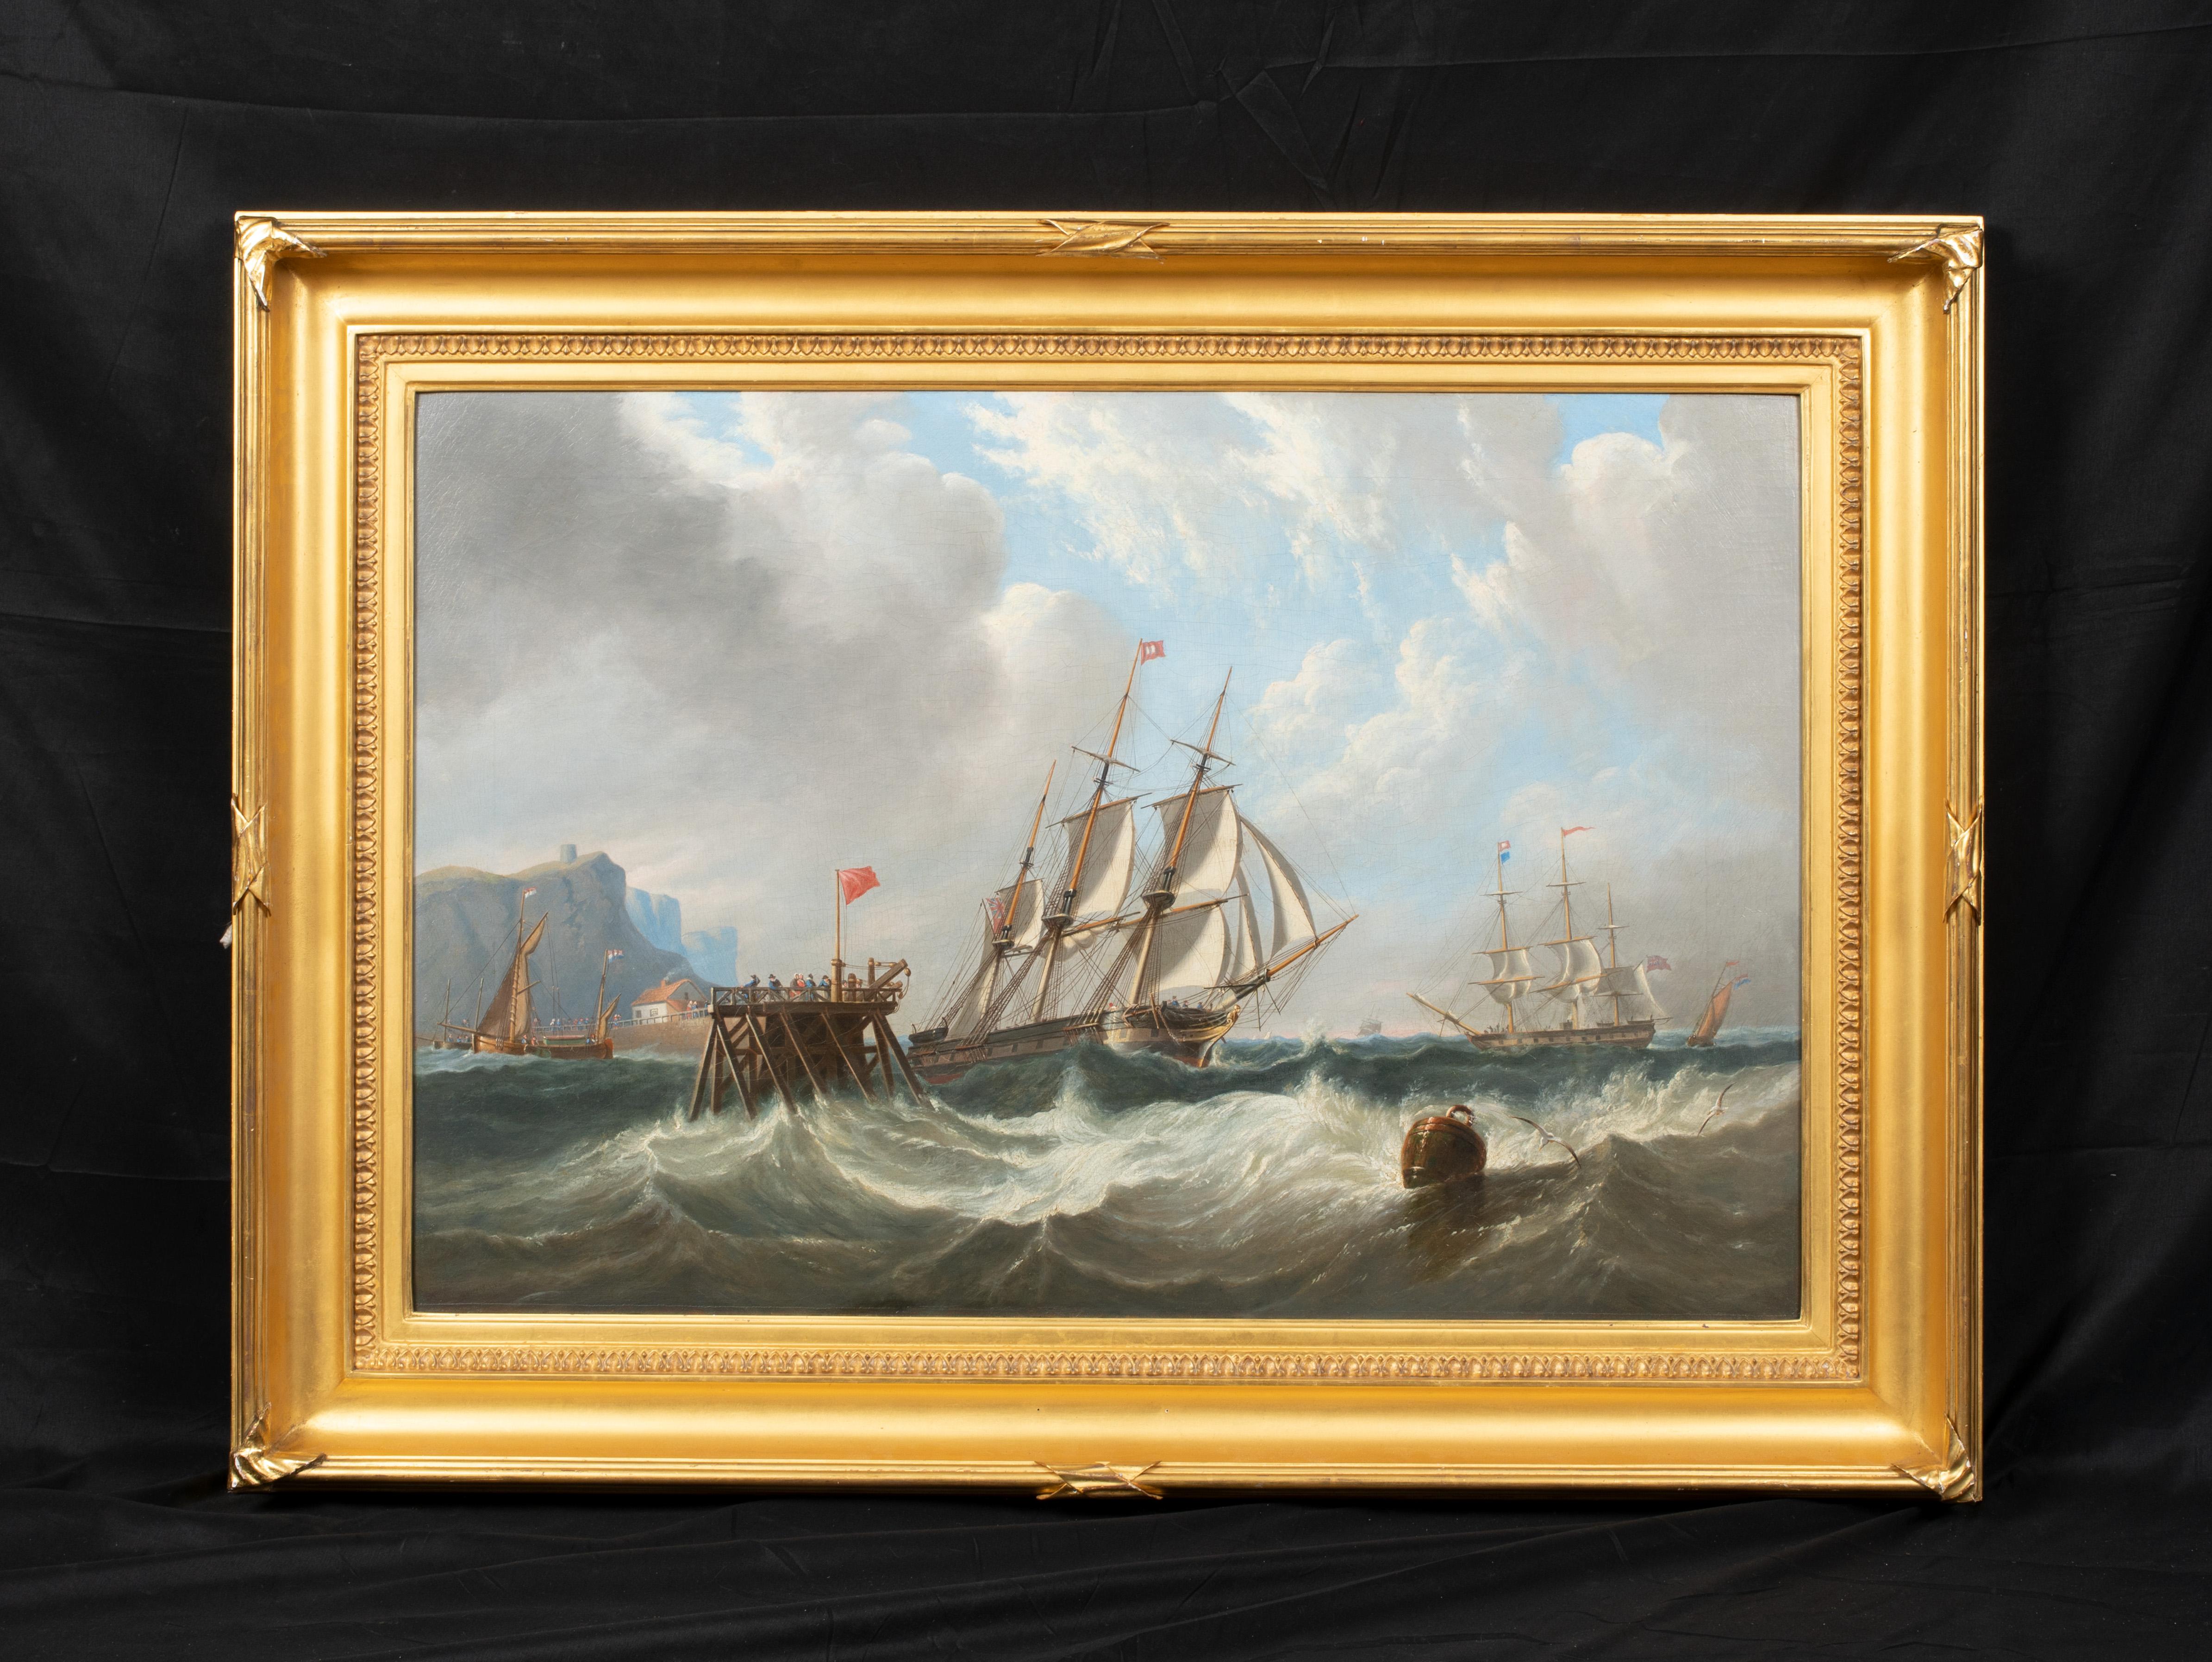 Ship In A Swell Off The Pier, 19th Century - Painting by Henry Redmore